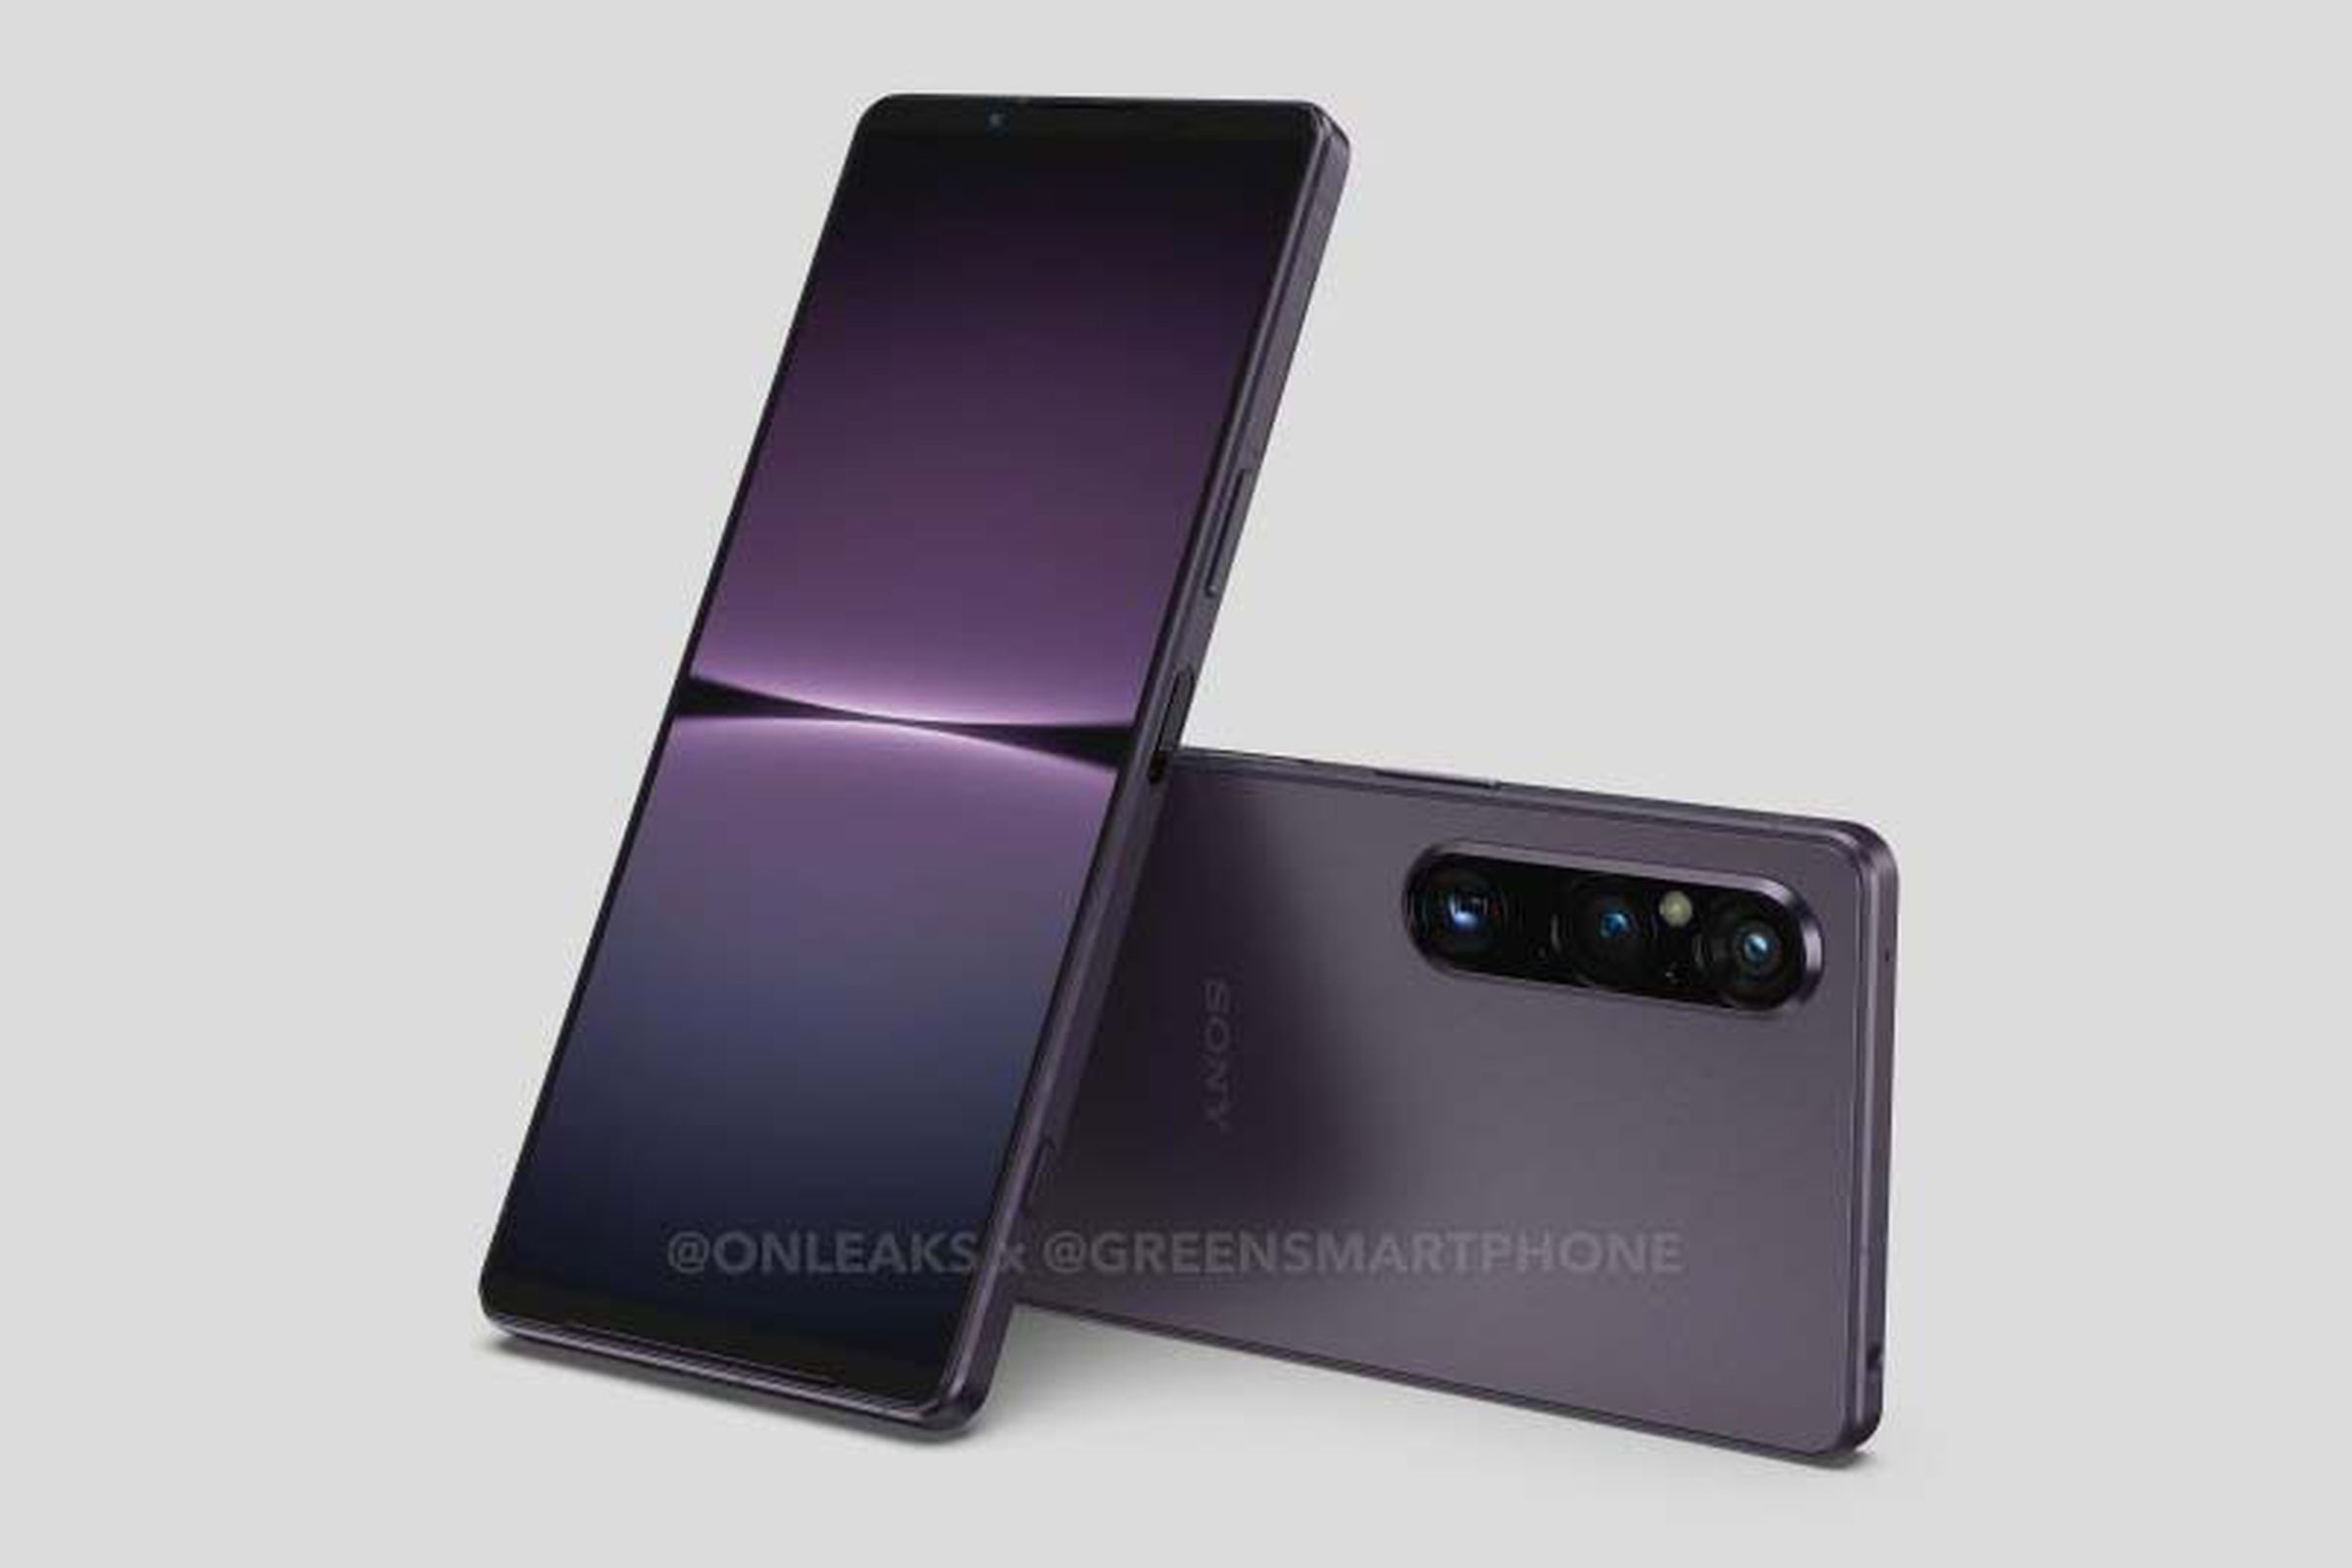 Unofficial renders of the Xperia 1 V,